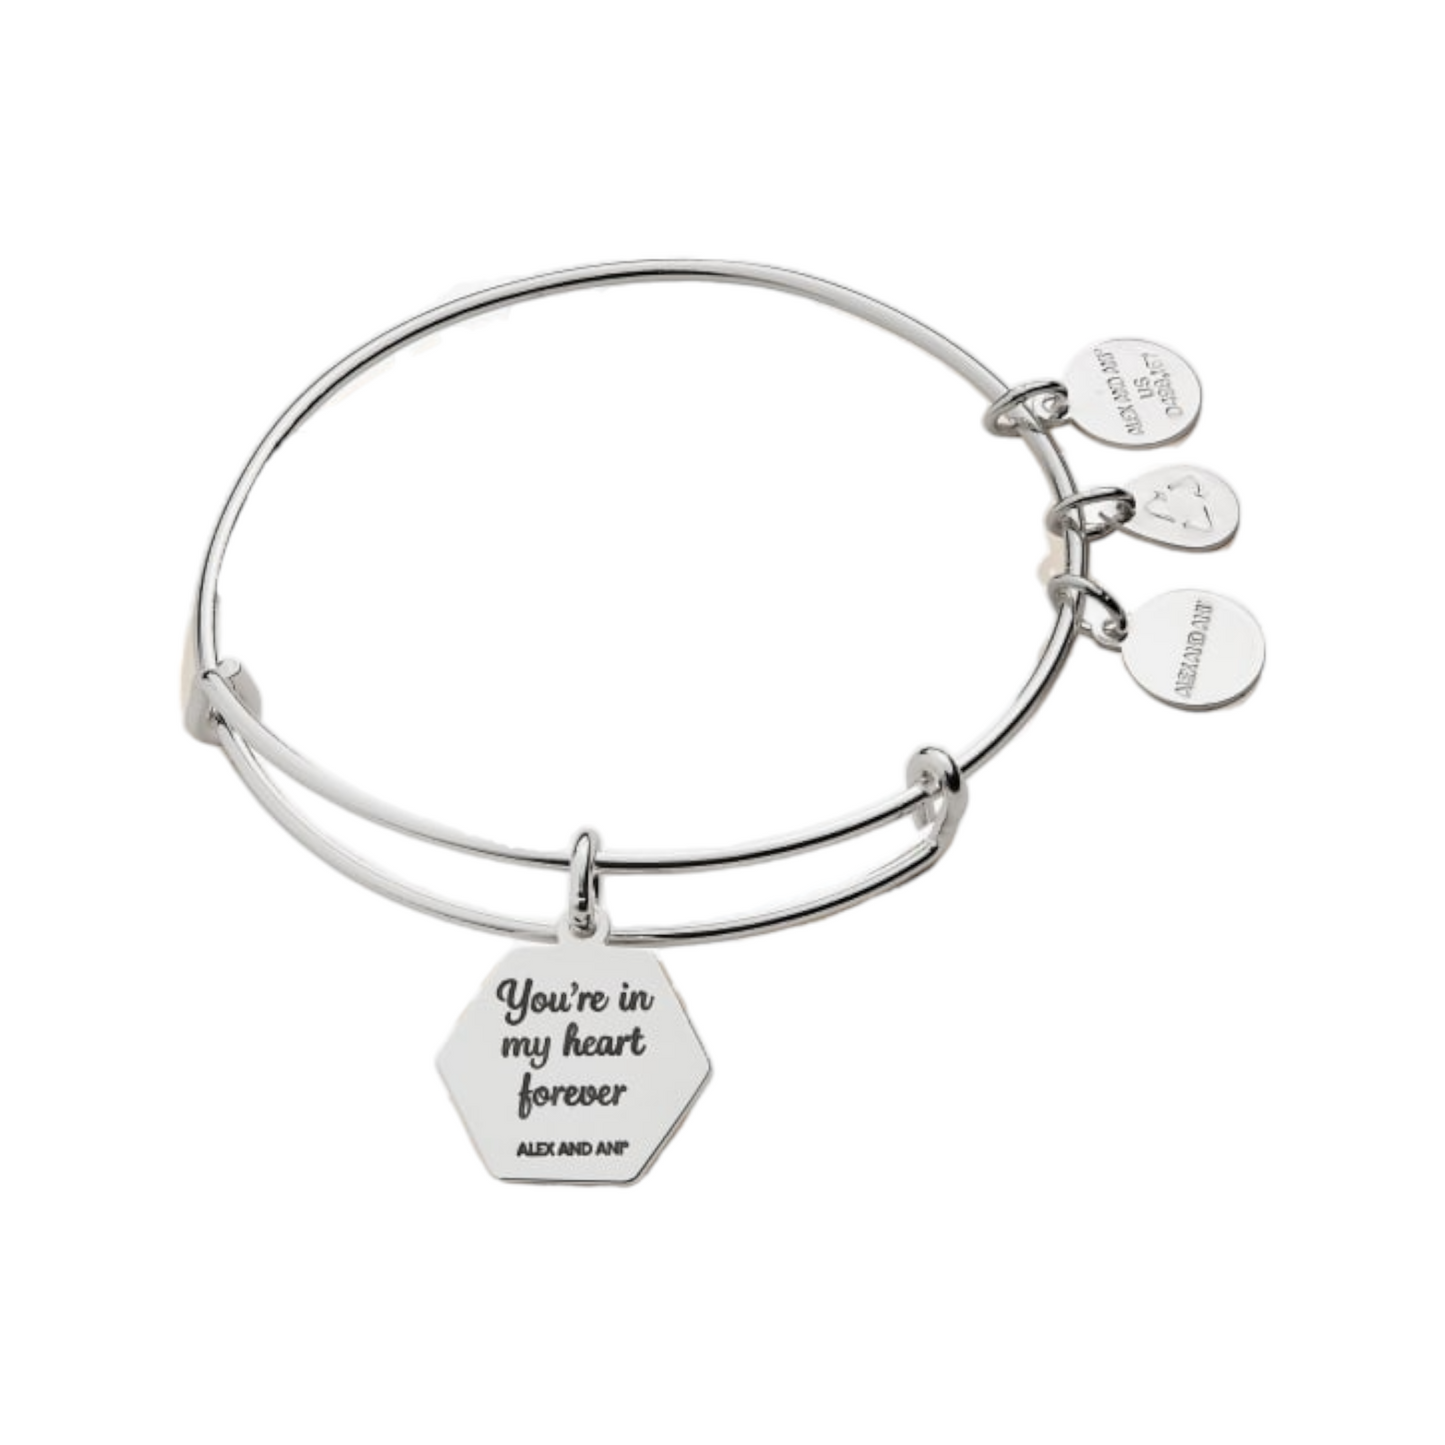 Alex and Ani Stepmom, 'You're in My Heart Forever' Charm Bangle